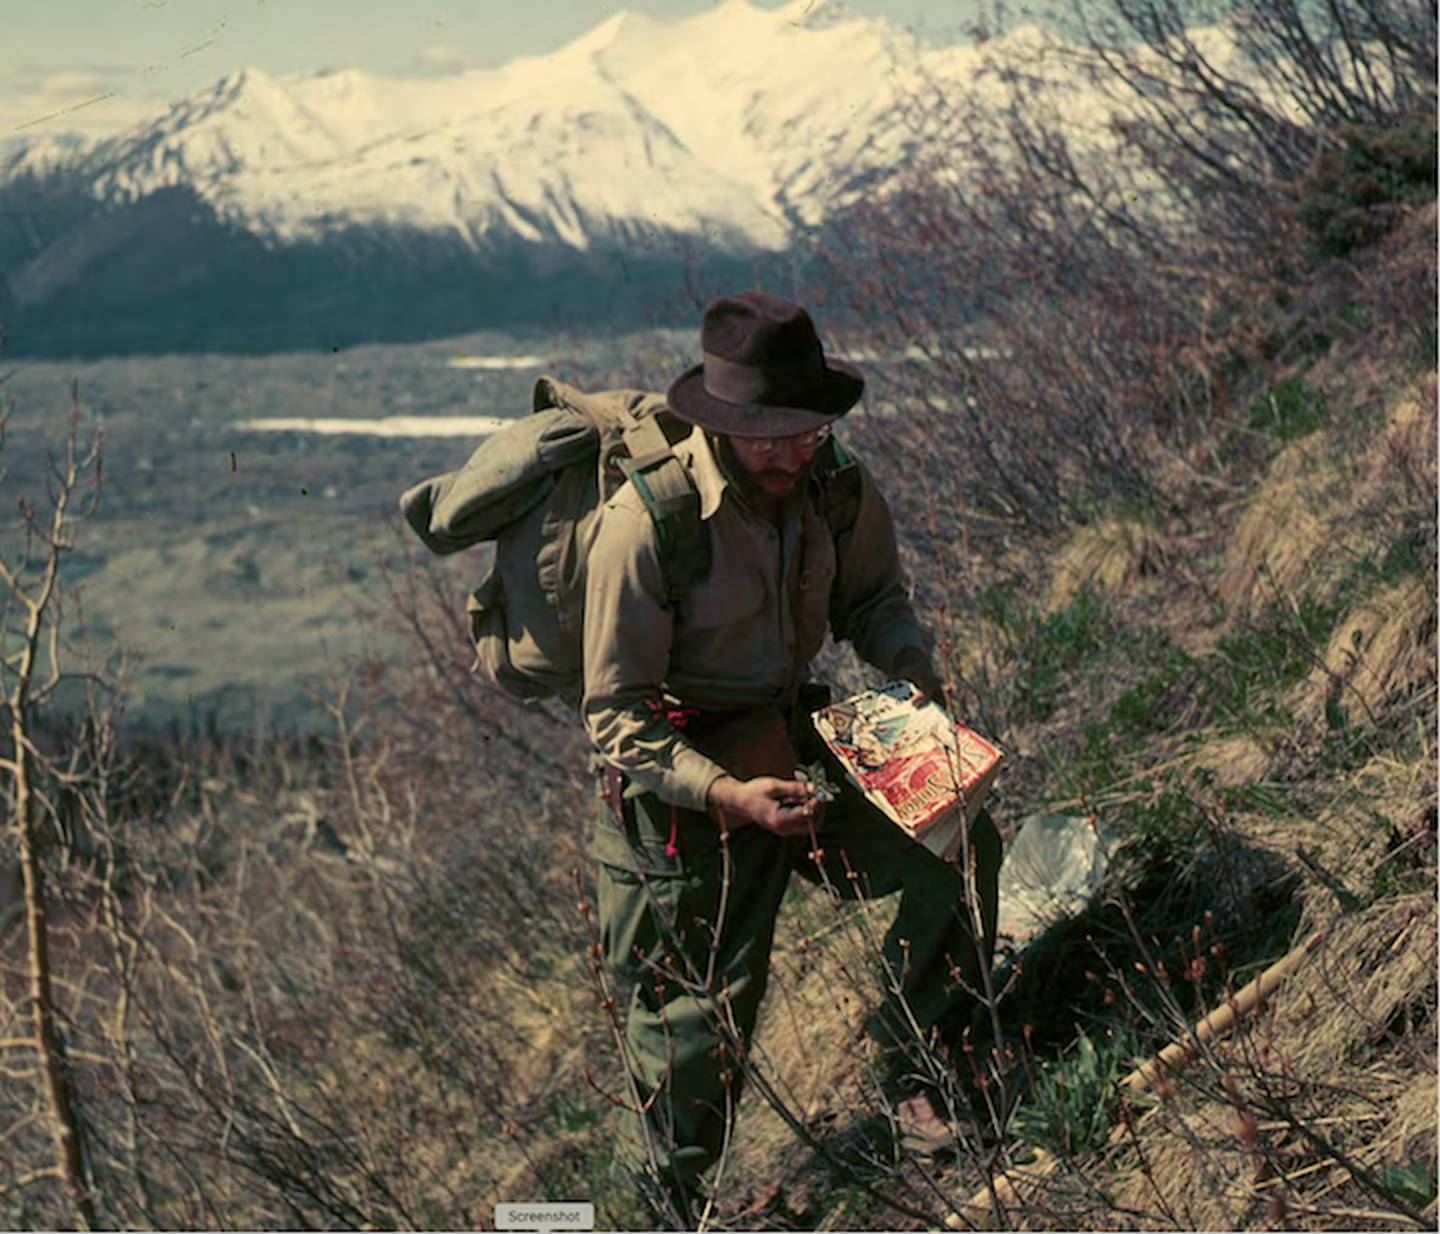 George Argus collects samples from willow bushes on a slope near the town of McCarthy